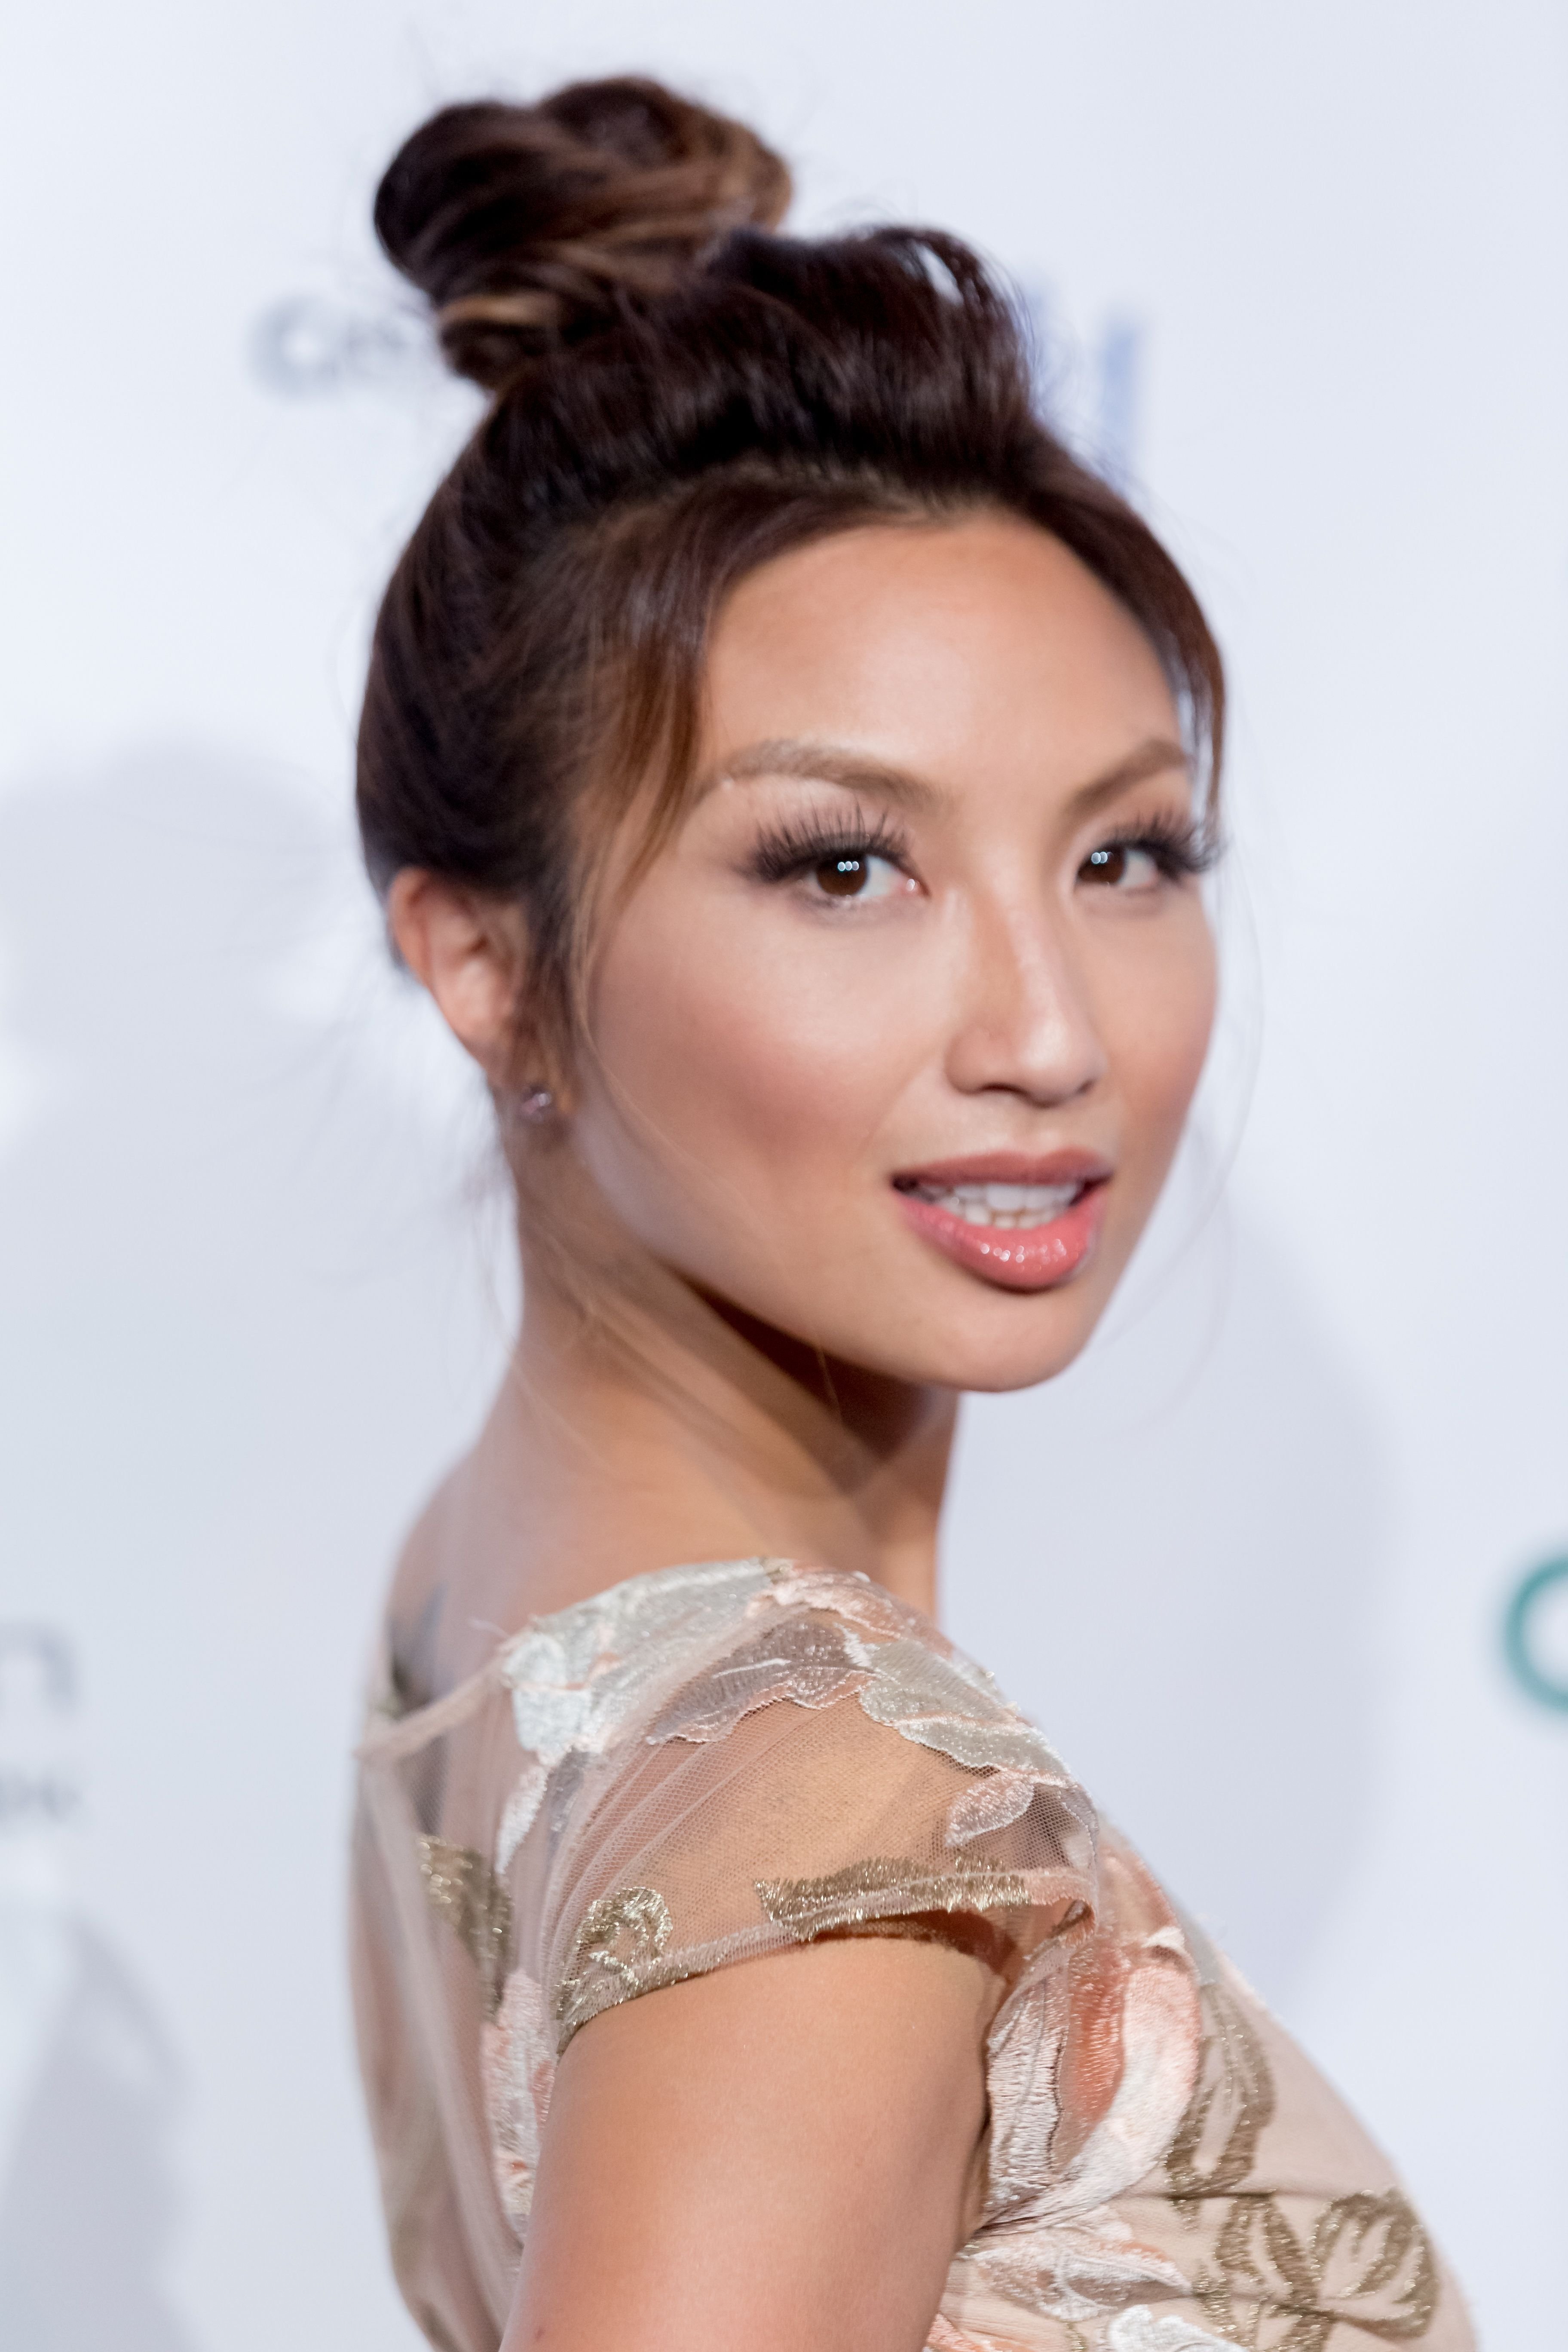 Television personality Jeannie Mai at a fashion week on September 29, 2016 in California. | Photo: Getty Images